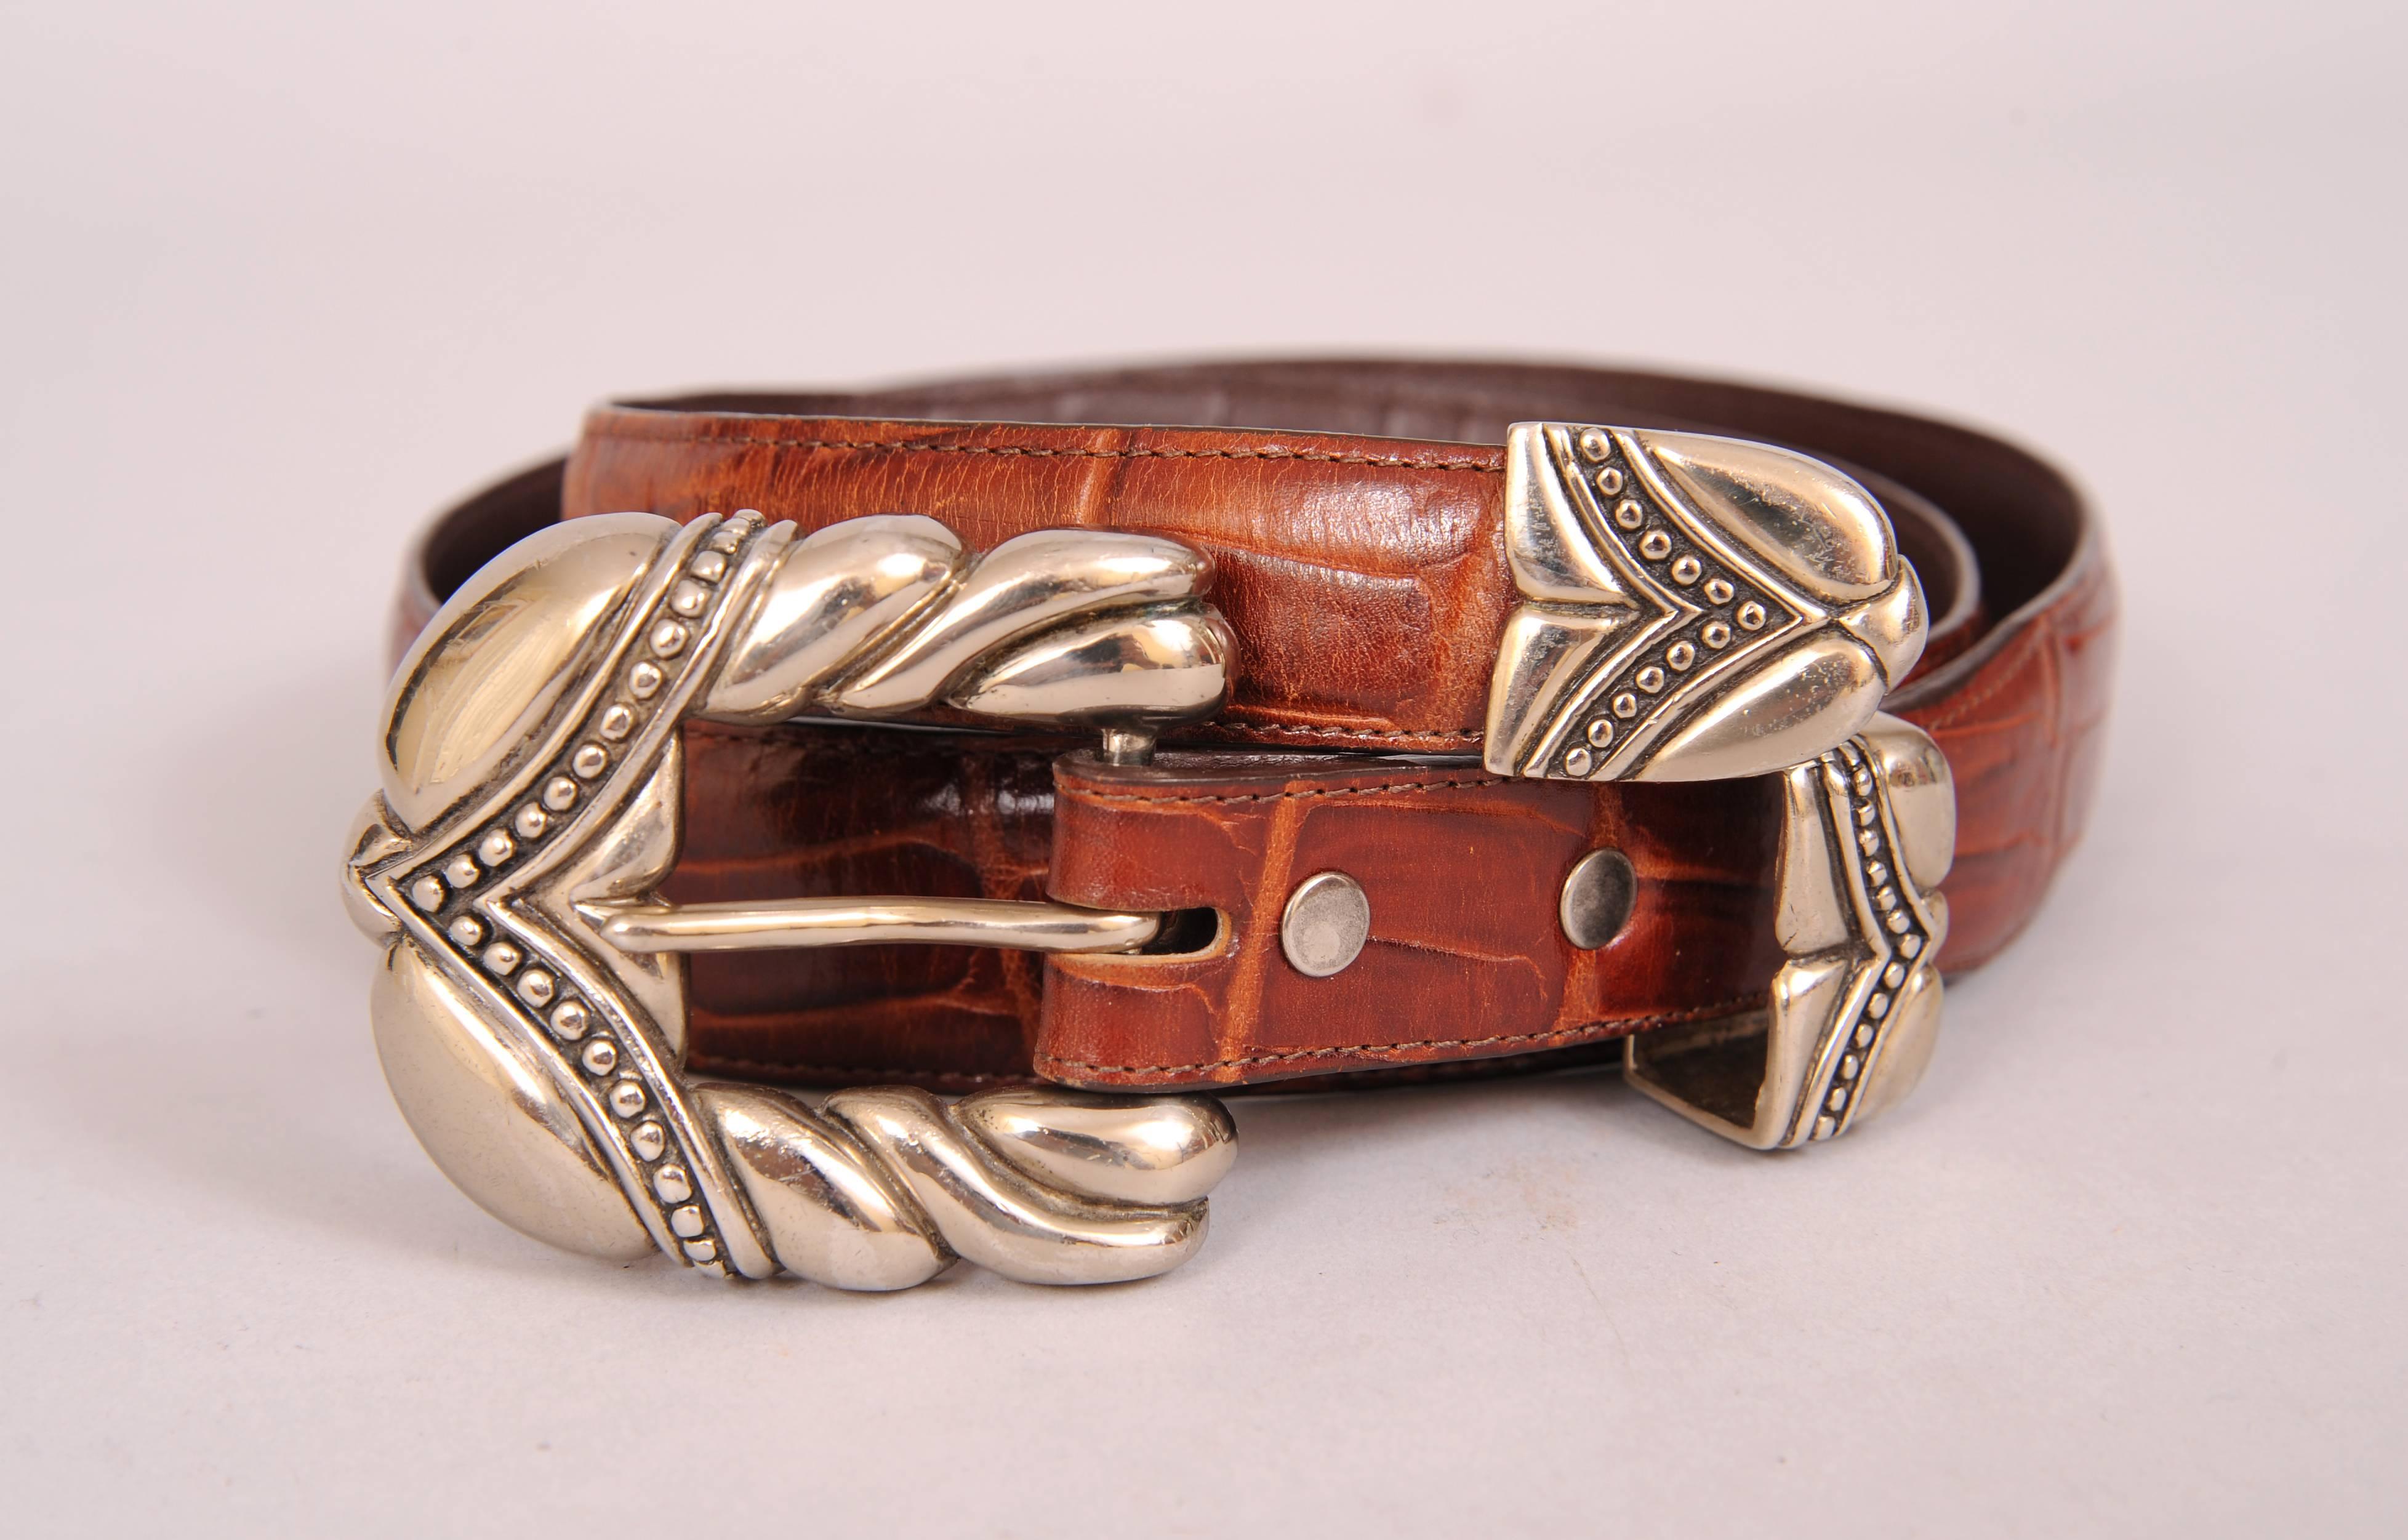 This great sporty leather belt with an alligator pattern has a sterling silver buckle, keeper and tip in a bold and graphic design. The belt is marked 32 and it is in excellent condition. It fits a size 30